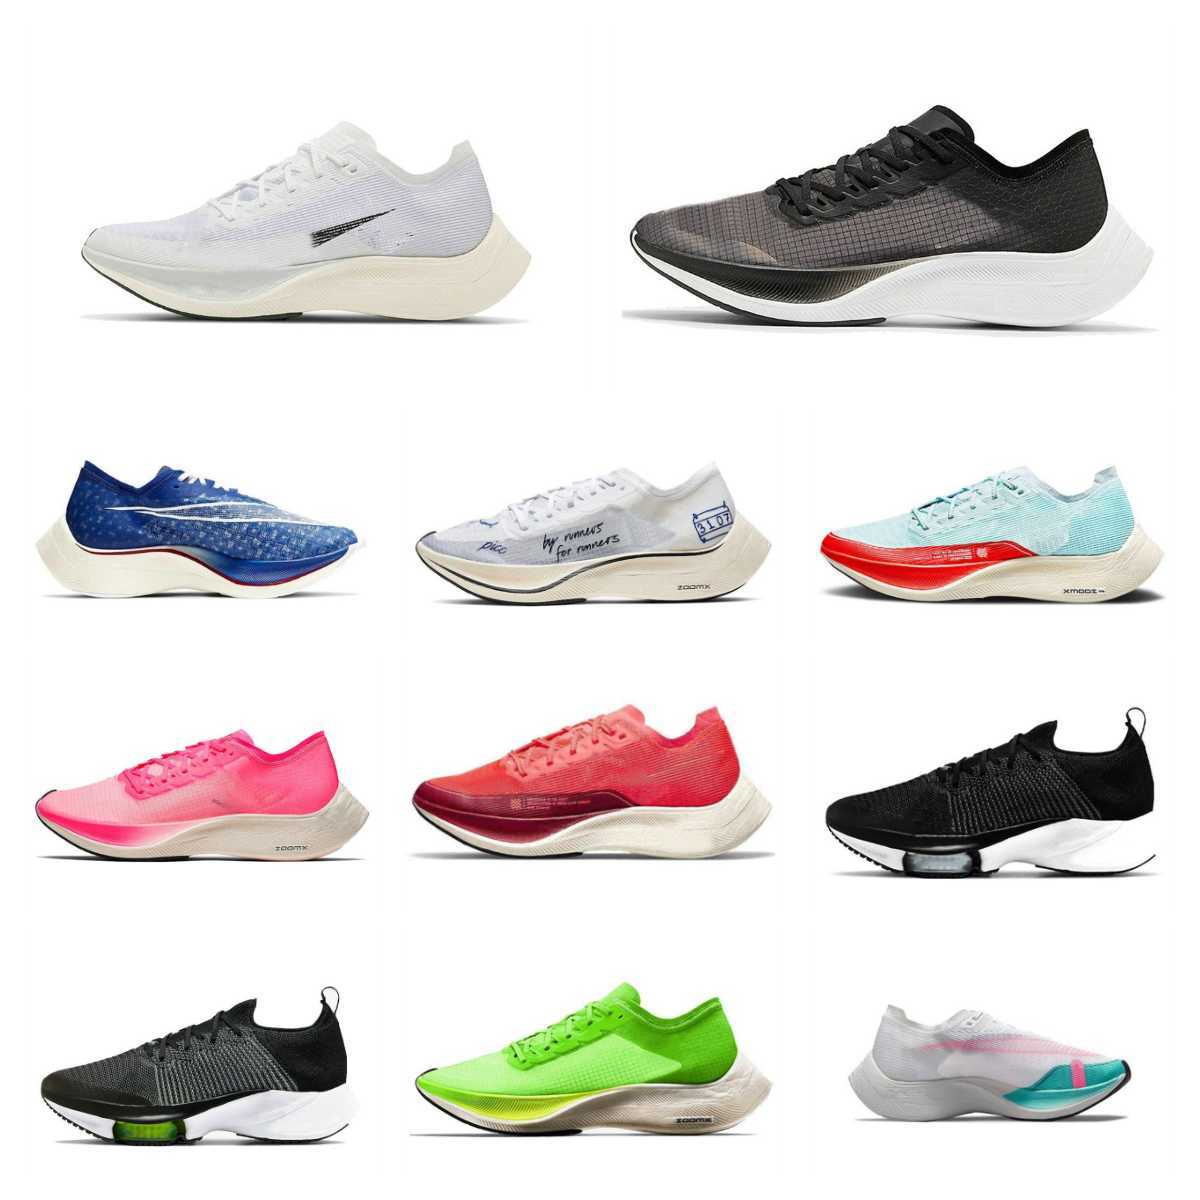 

Trainers Air Zoomx Vaporfly Next% 2 Running Shoes Mens Womens 3 Prototype Bright Mango Light Weight Tempo Max Fly Knit Hyper Violet Flash Crimson Neon Runners Sneakers, Please contact us